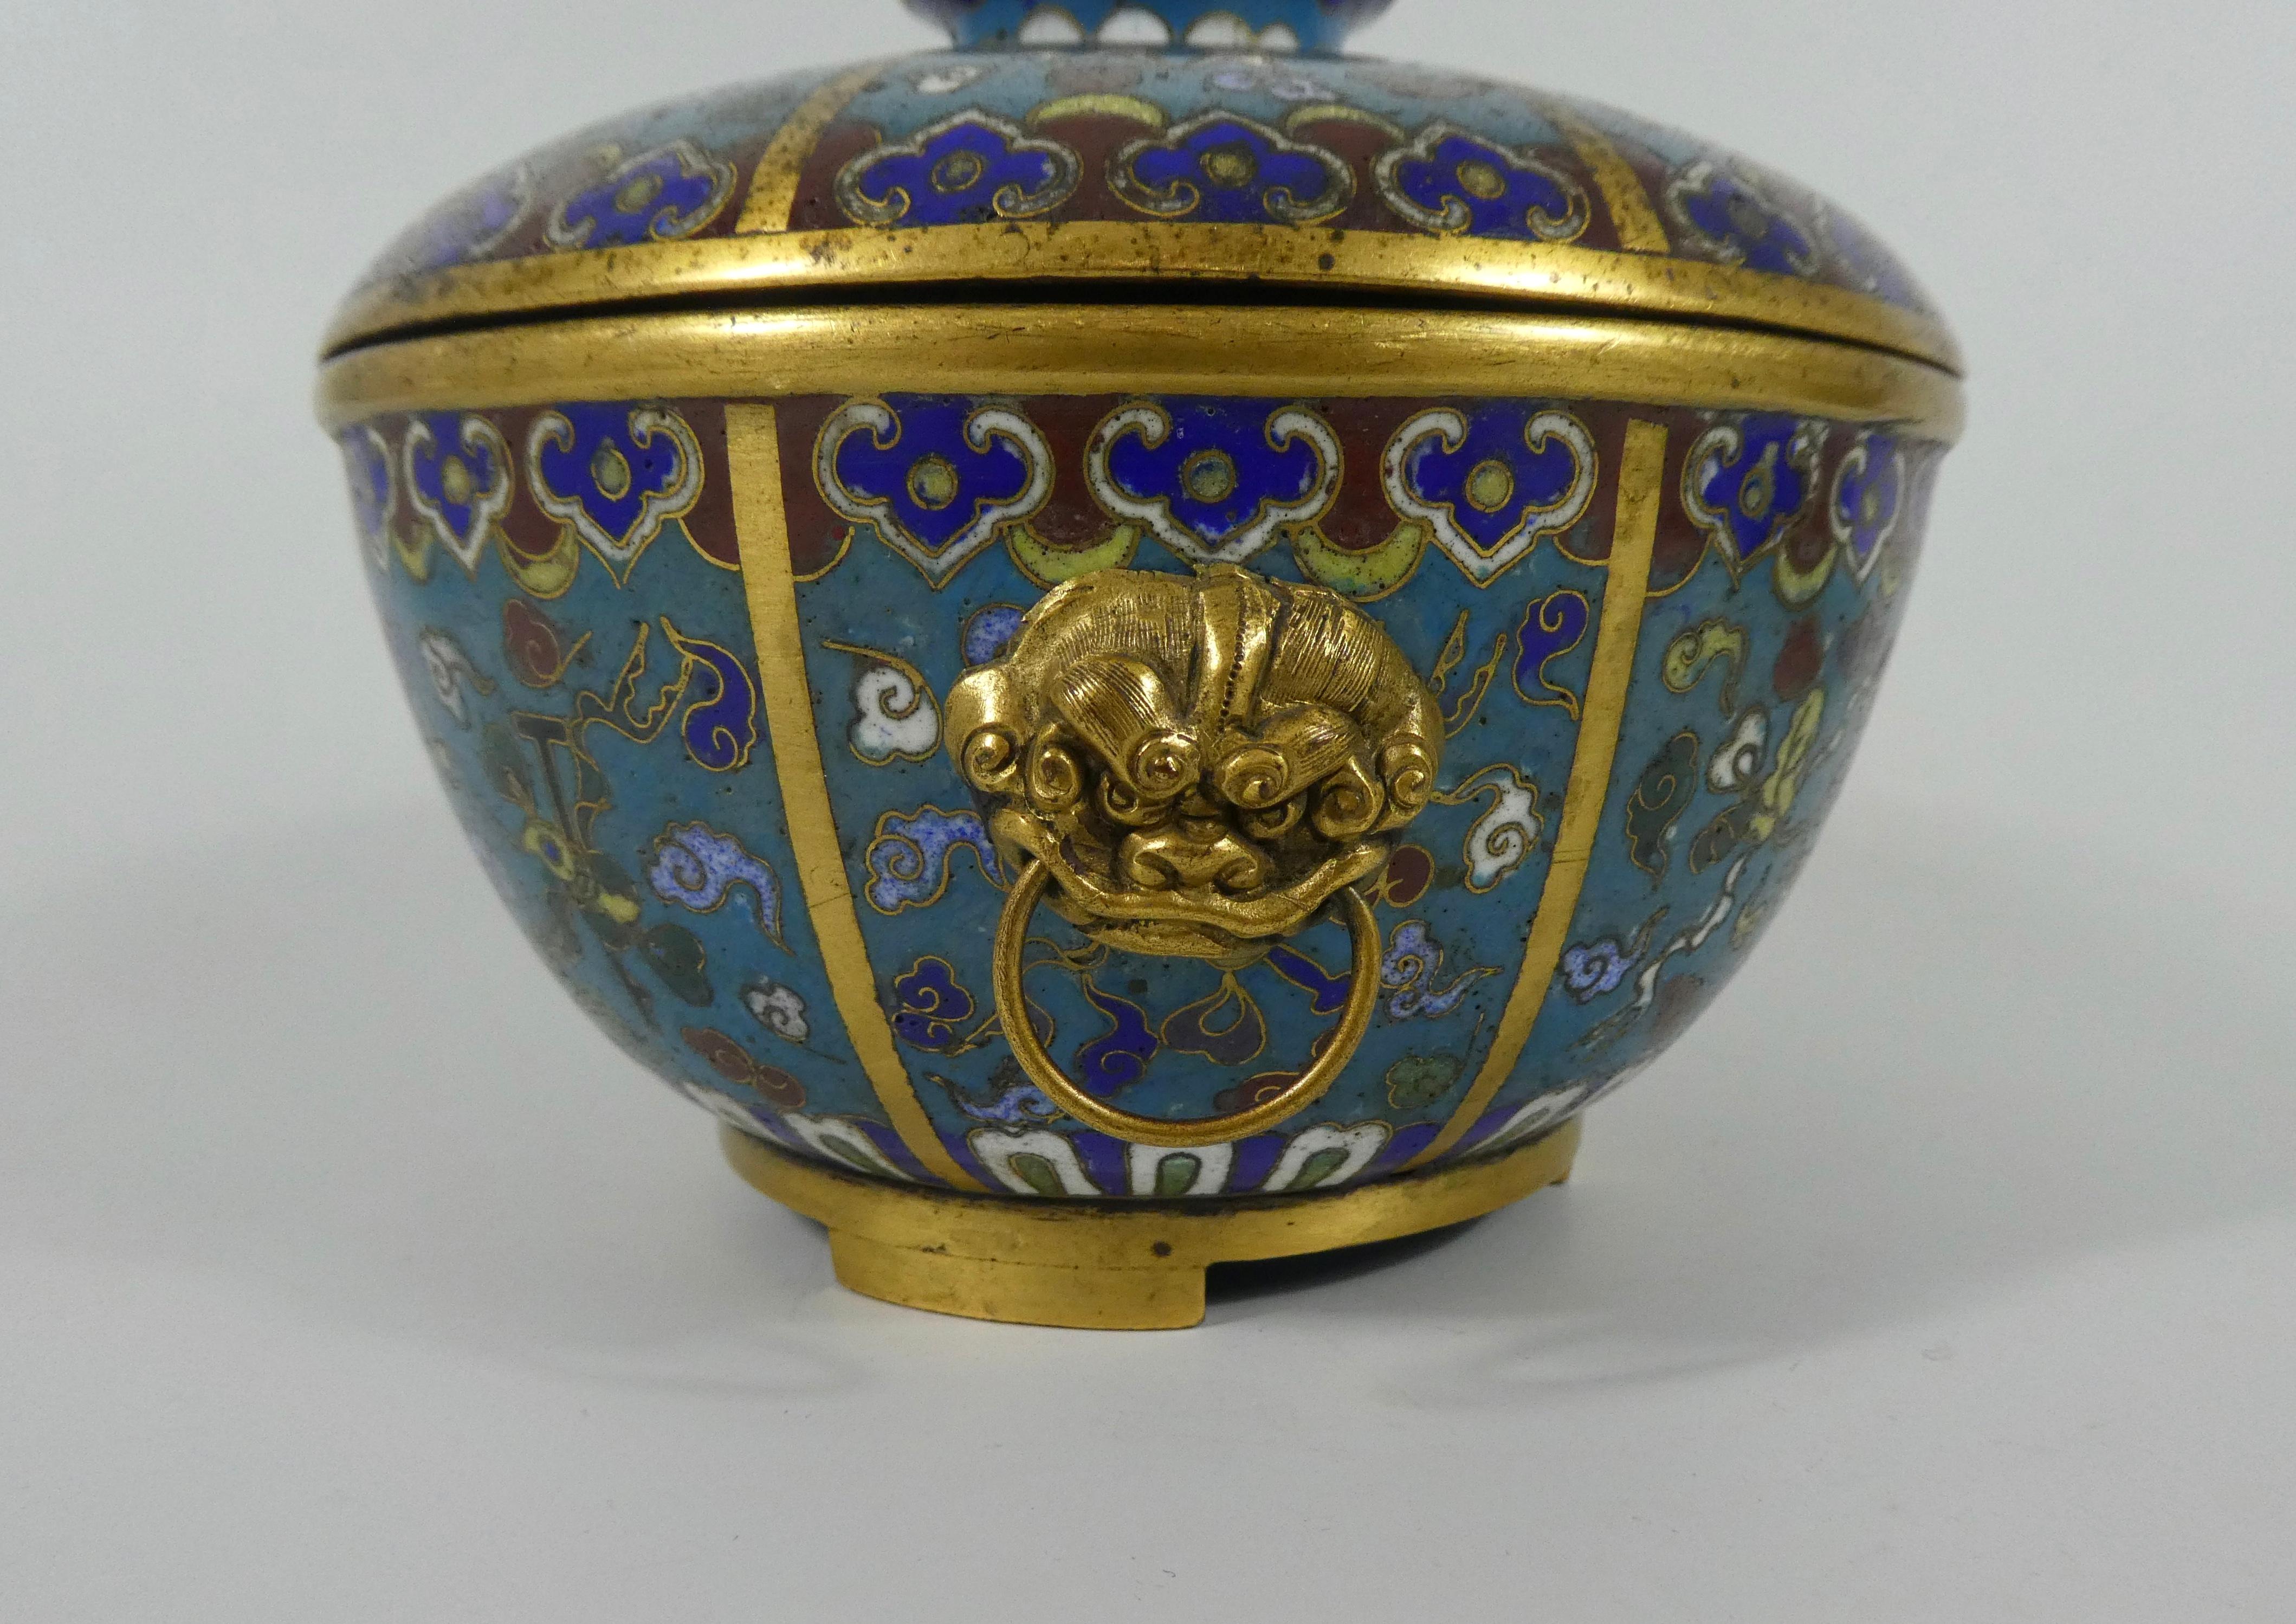 Other Pair of Chinese Cloisonne Bowls and Covers, early 19th Century, Qing Dynasty